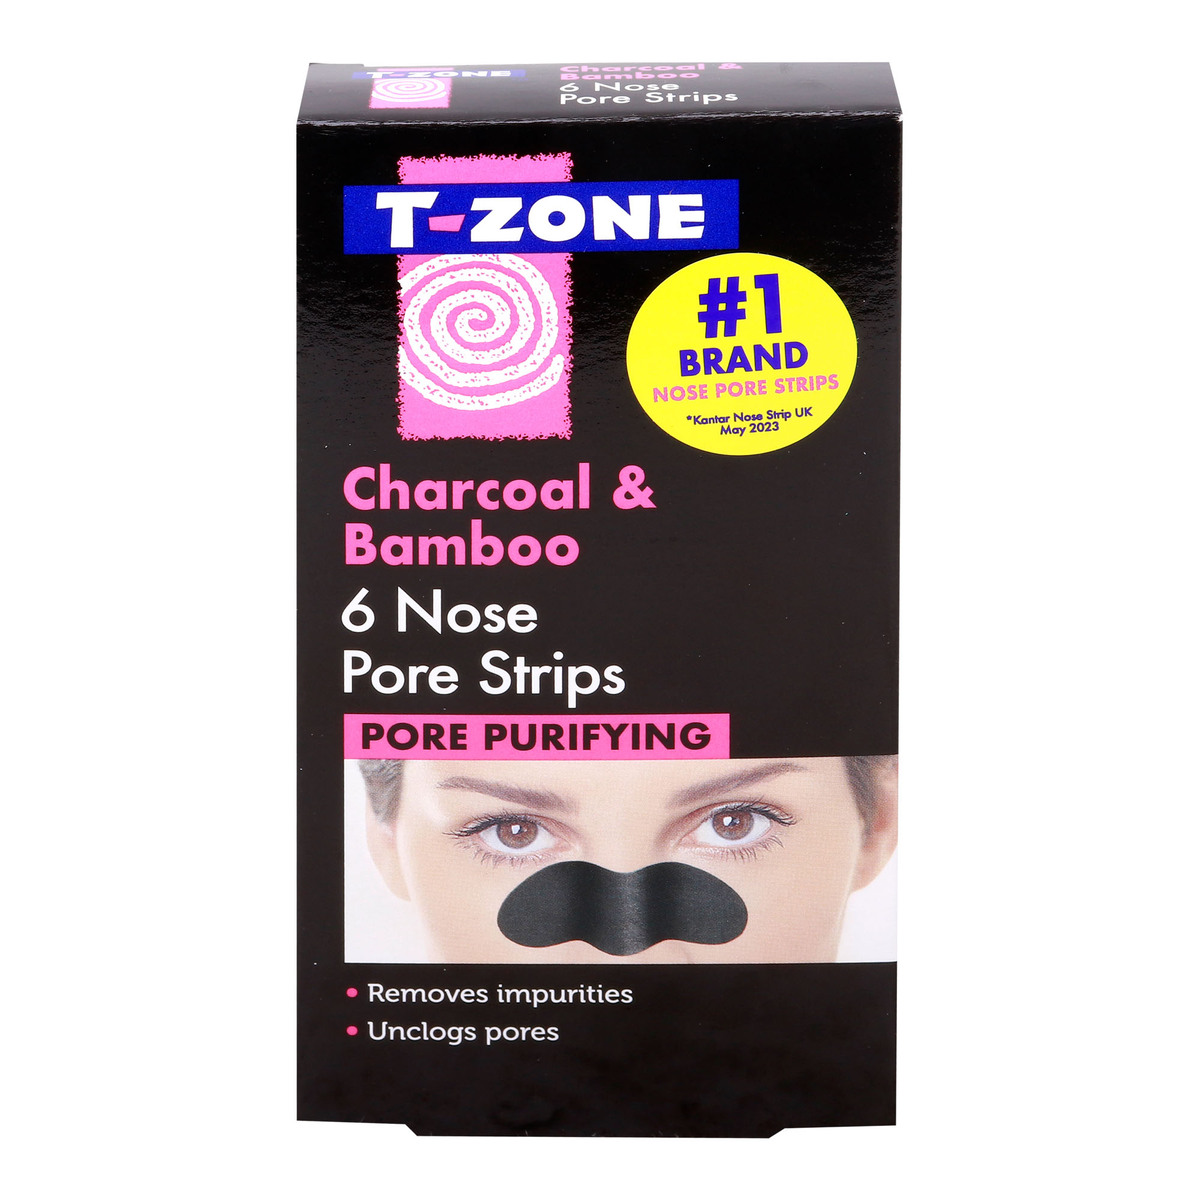 T-Zone Charcoal & Bamboo Nose Pore Strips 6 pcs